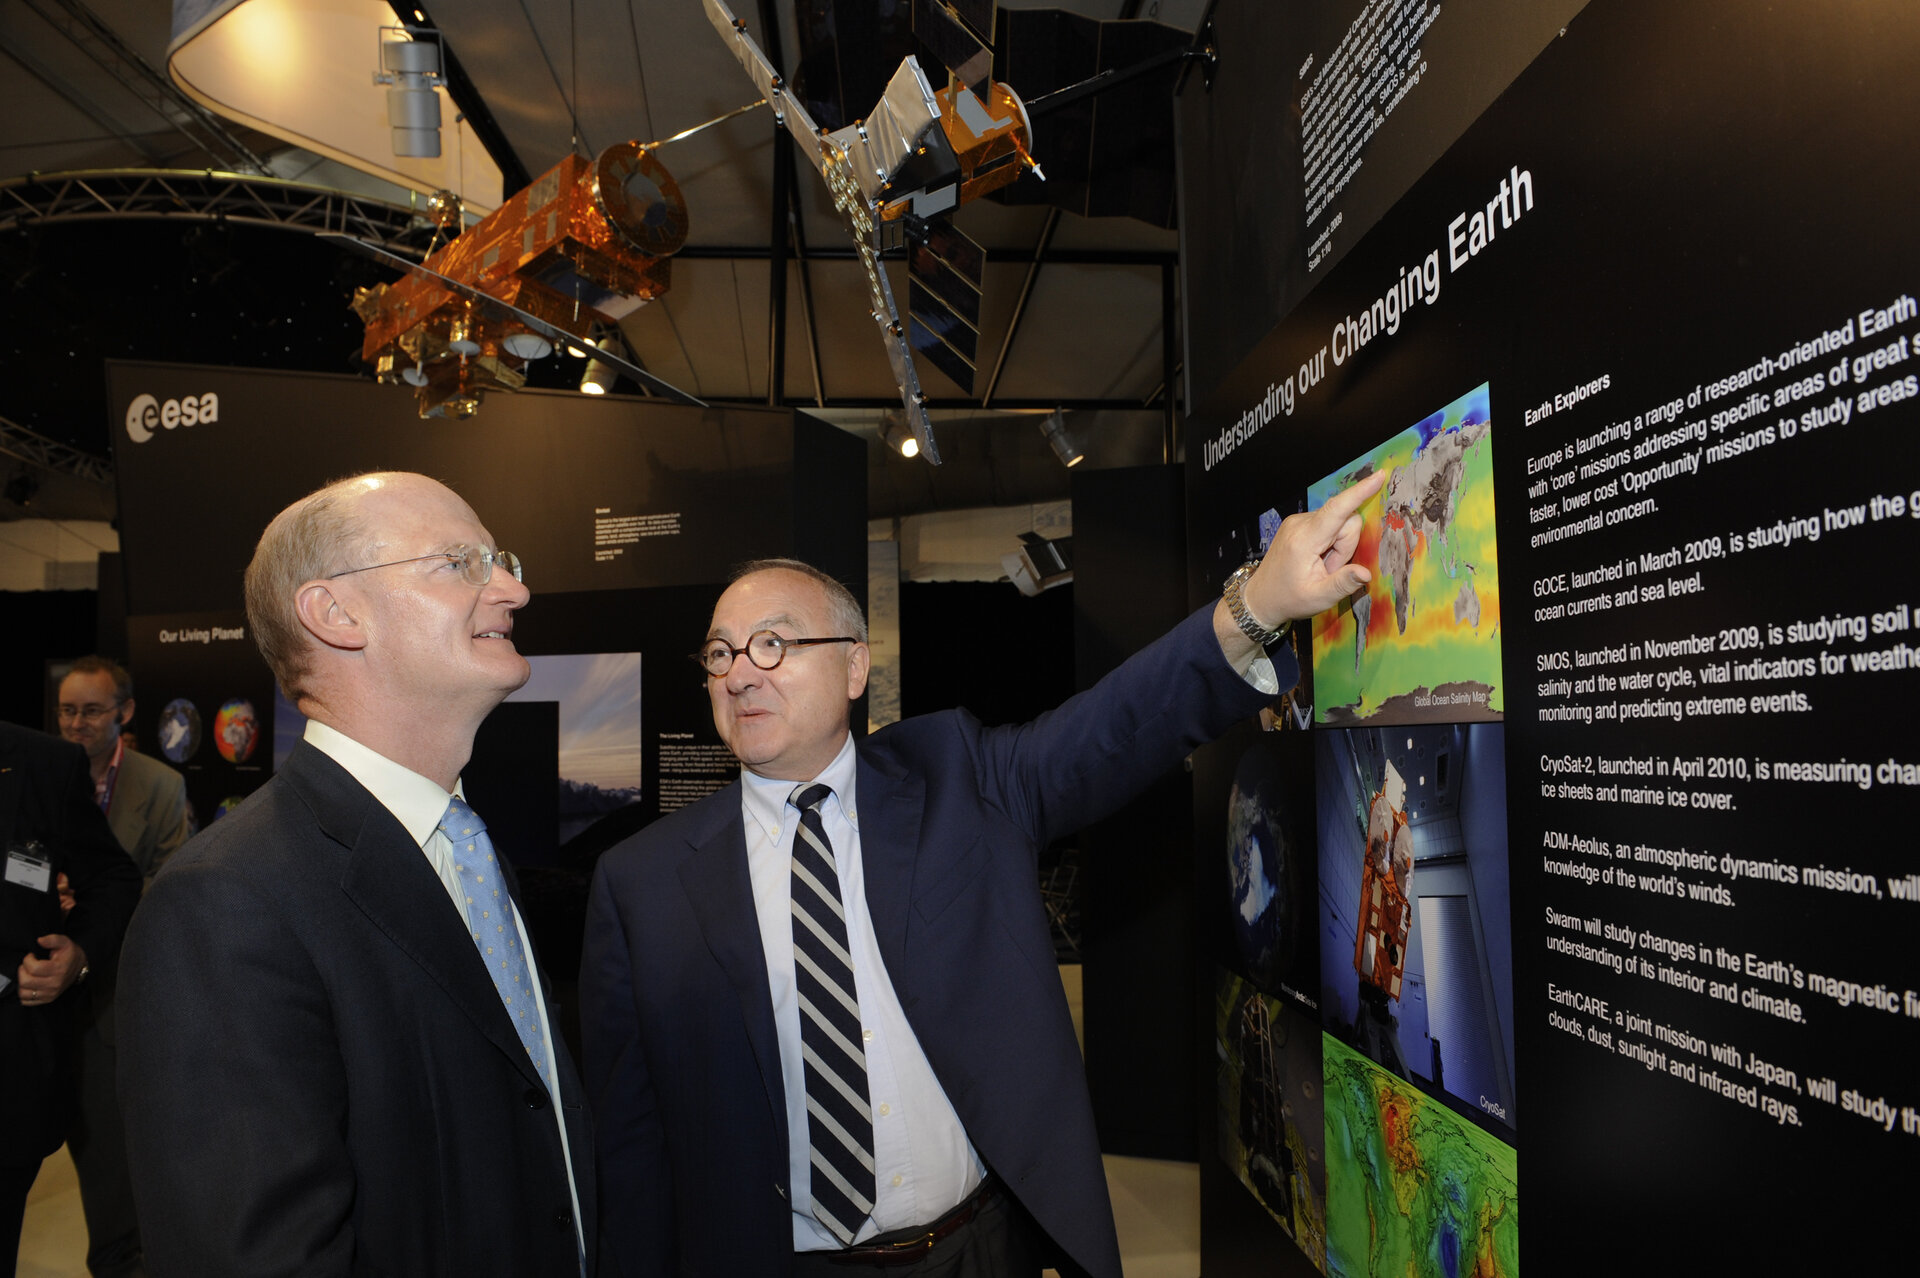 Jean-Jacques Dordain presents the first Earth Explorer mission results to David Willetts